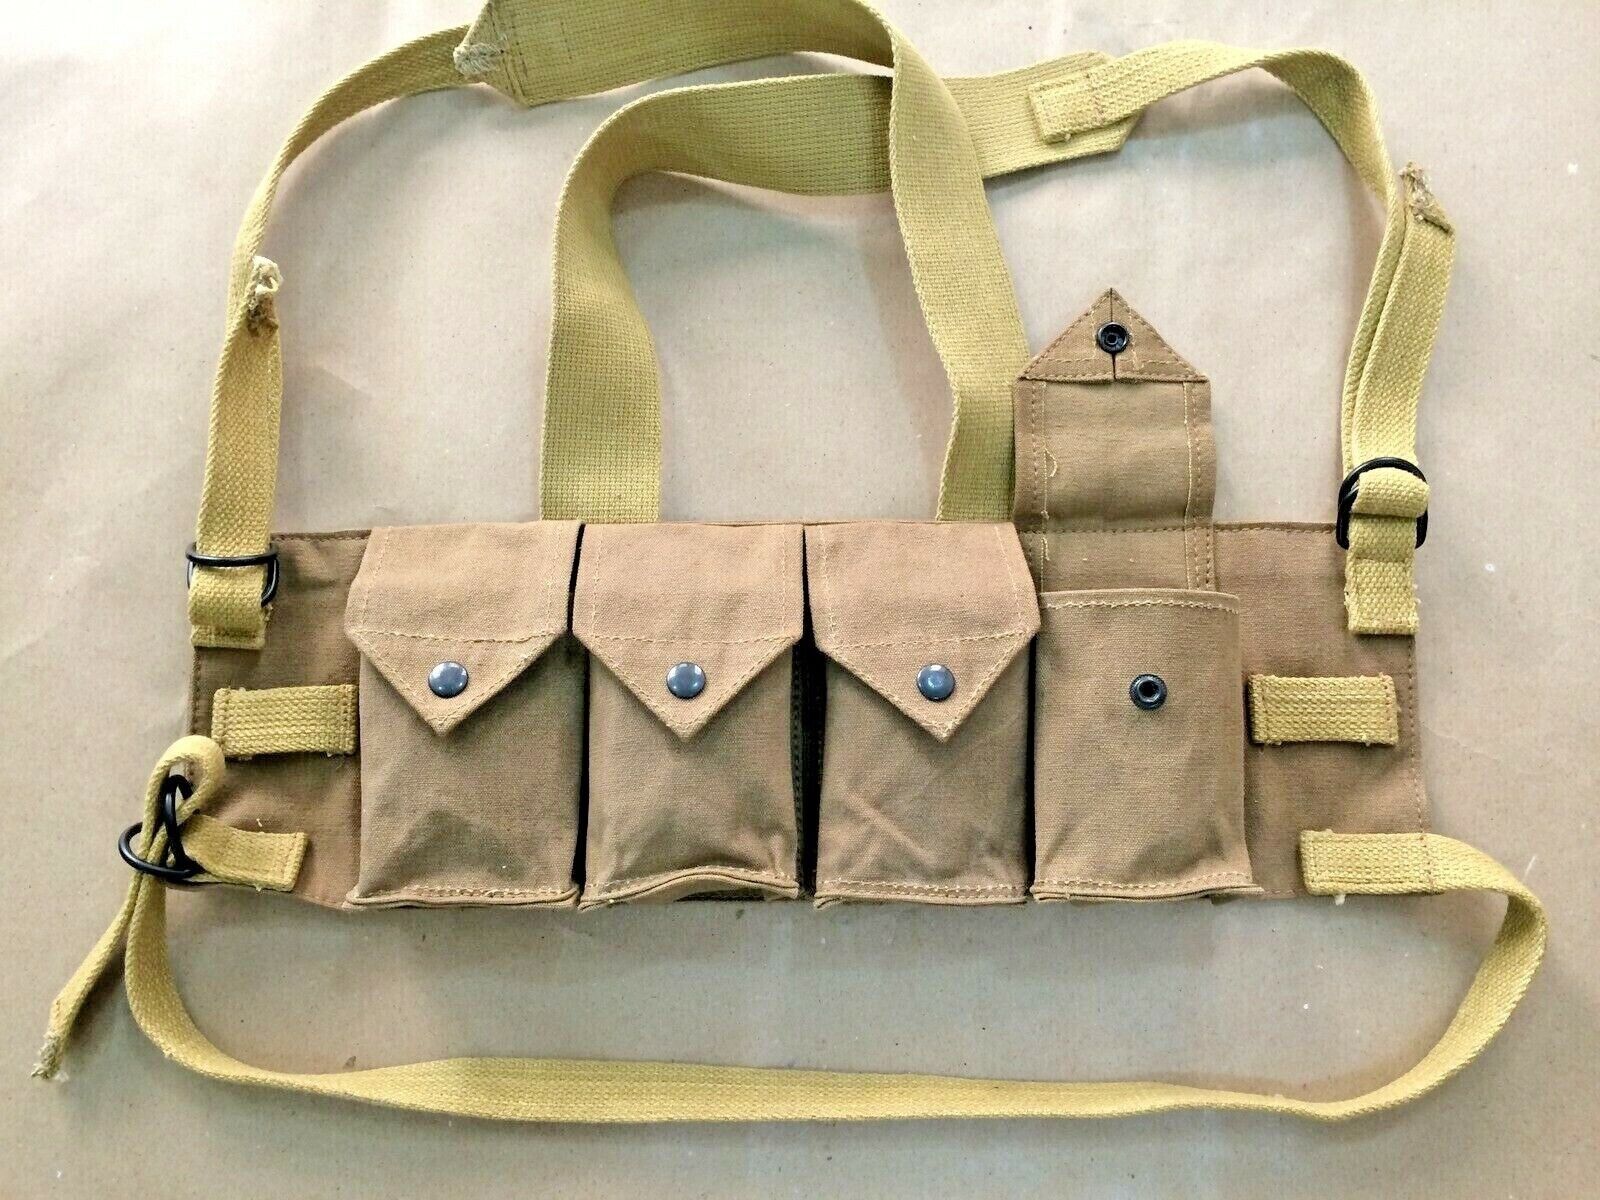 Lot of 4 CHEST RIG Rhodesian Fereday & Sons (Reproduction) x 4 UNITS